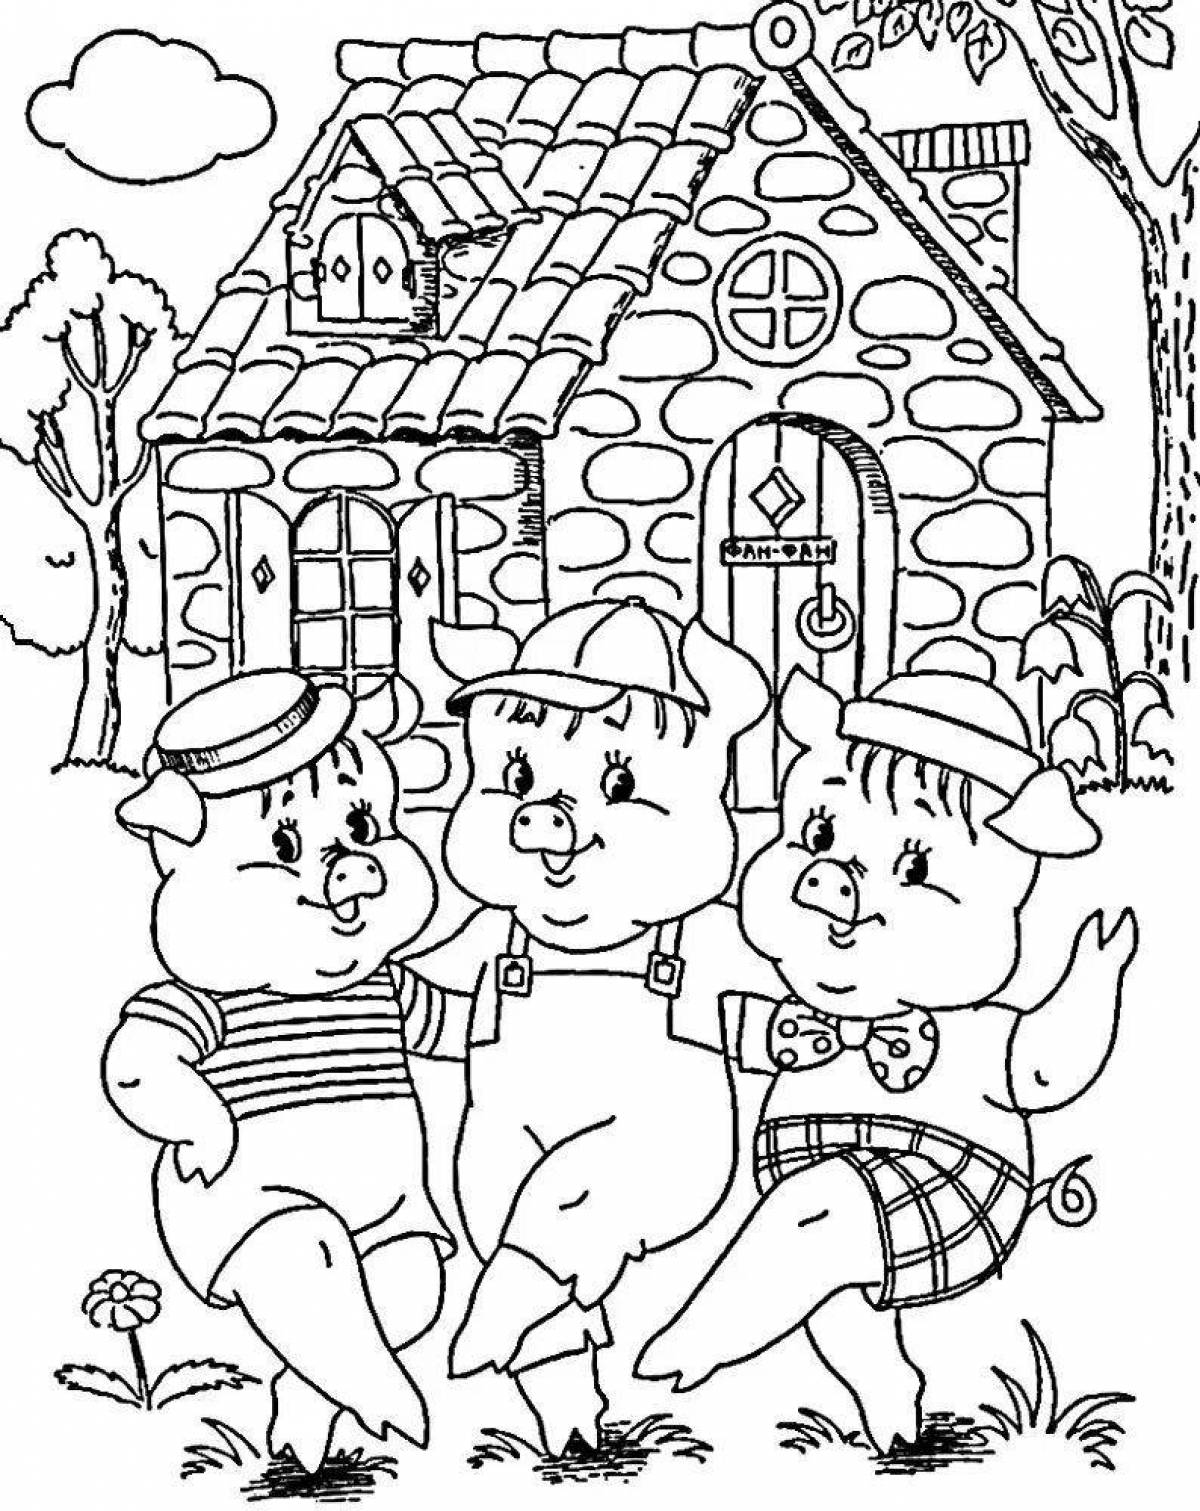 Fascinating fairy tale coloring book for kids